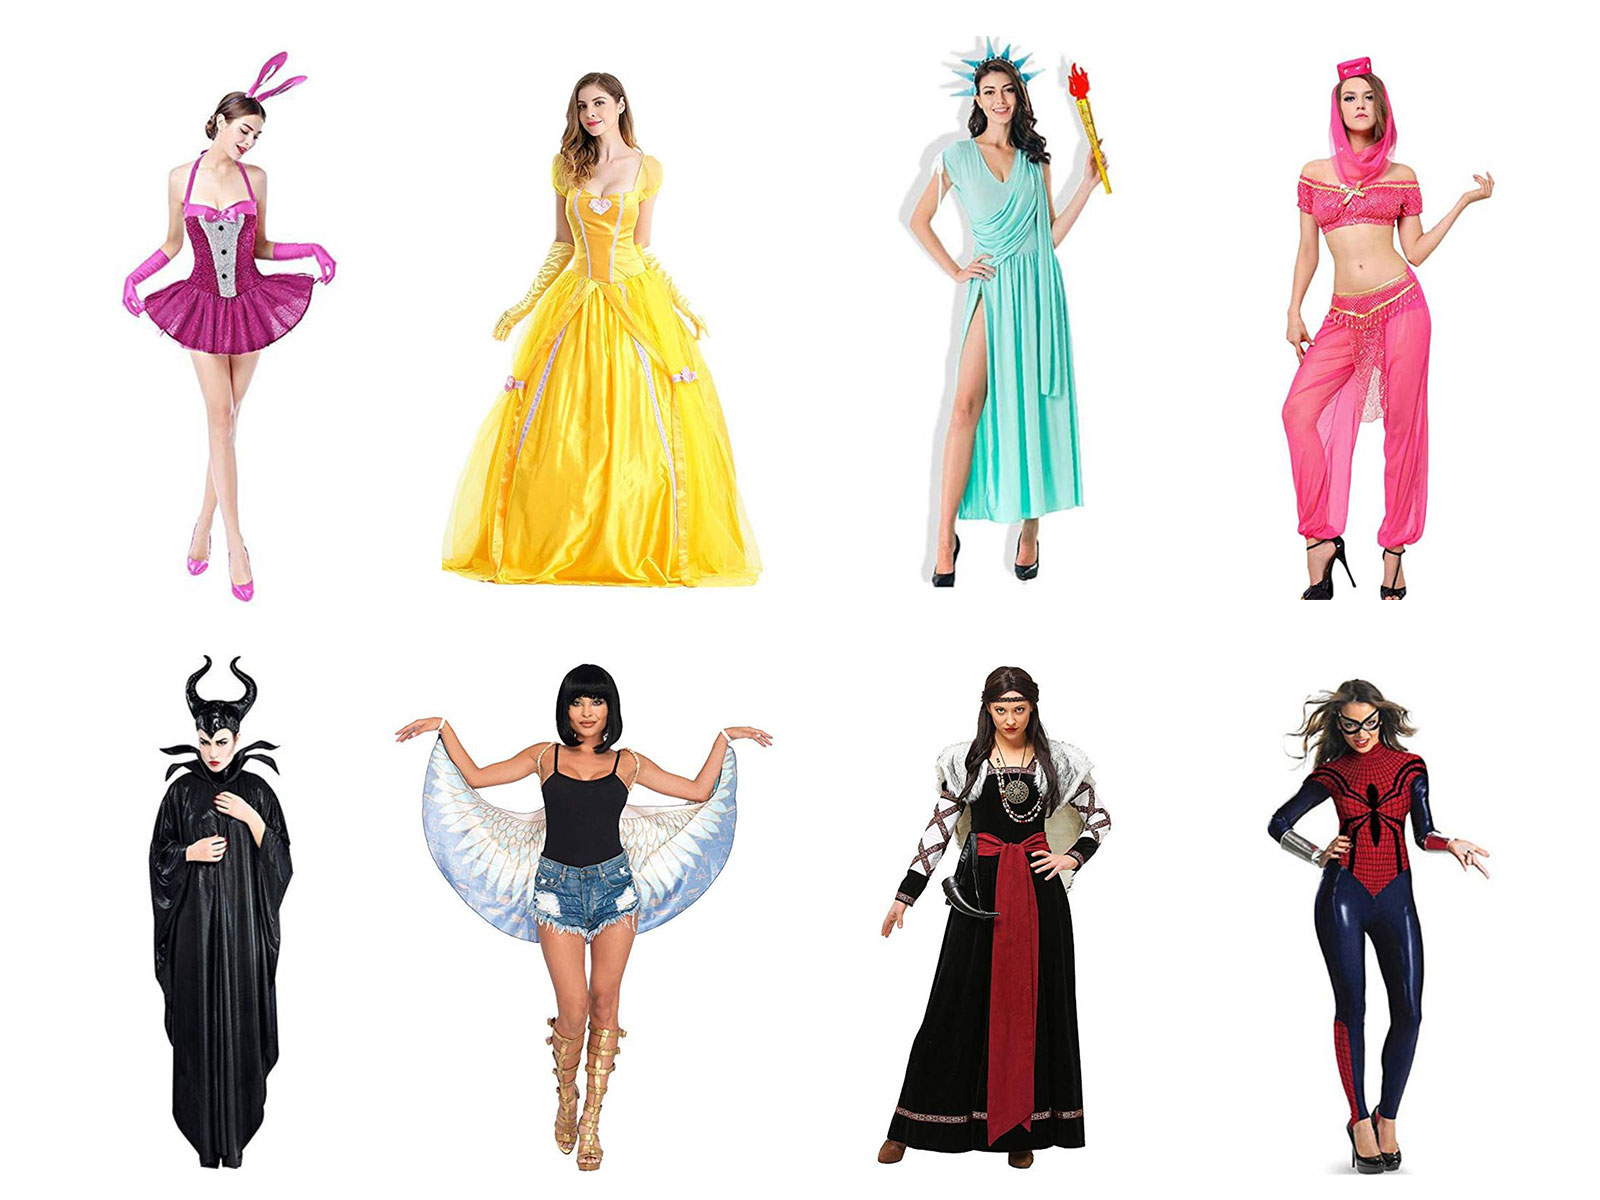 30-Best-Creative-Halloween-Party-Dresses-Costumes-For-Women-2019-Dress-Up-Ideas-F